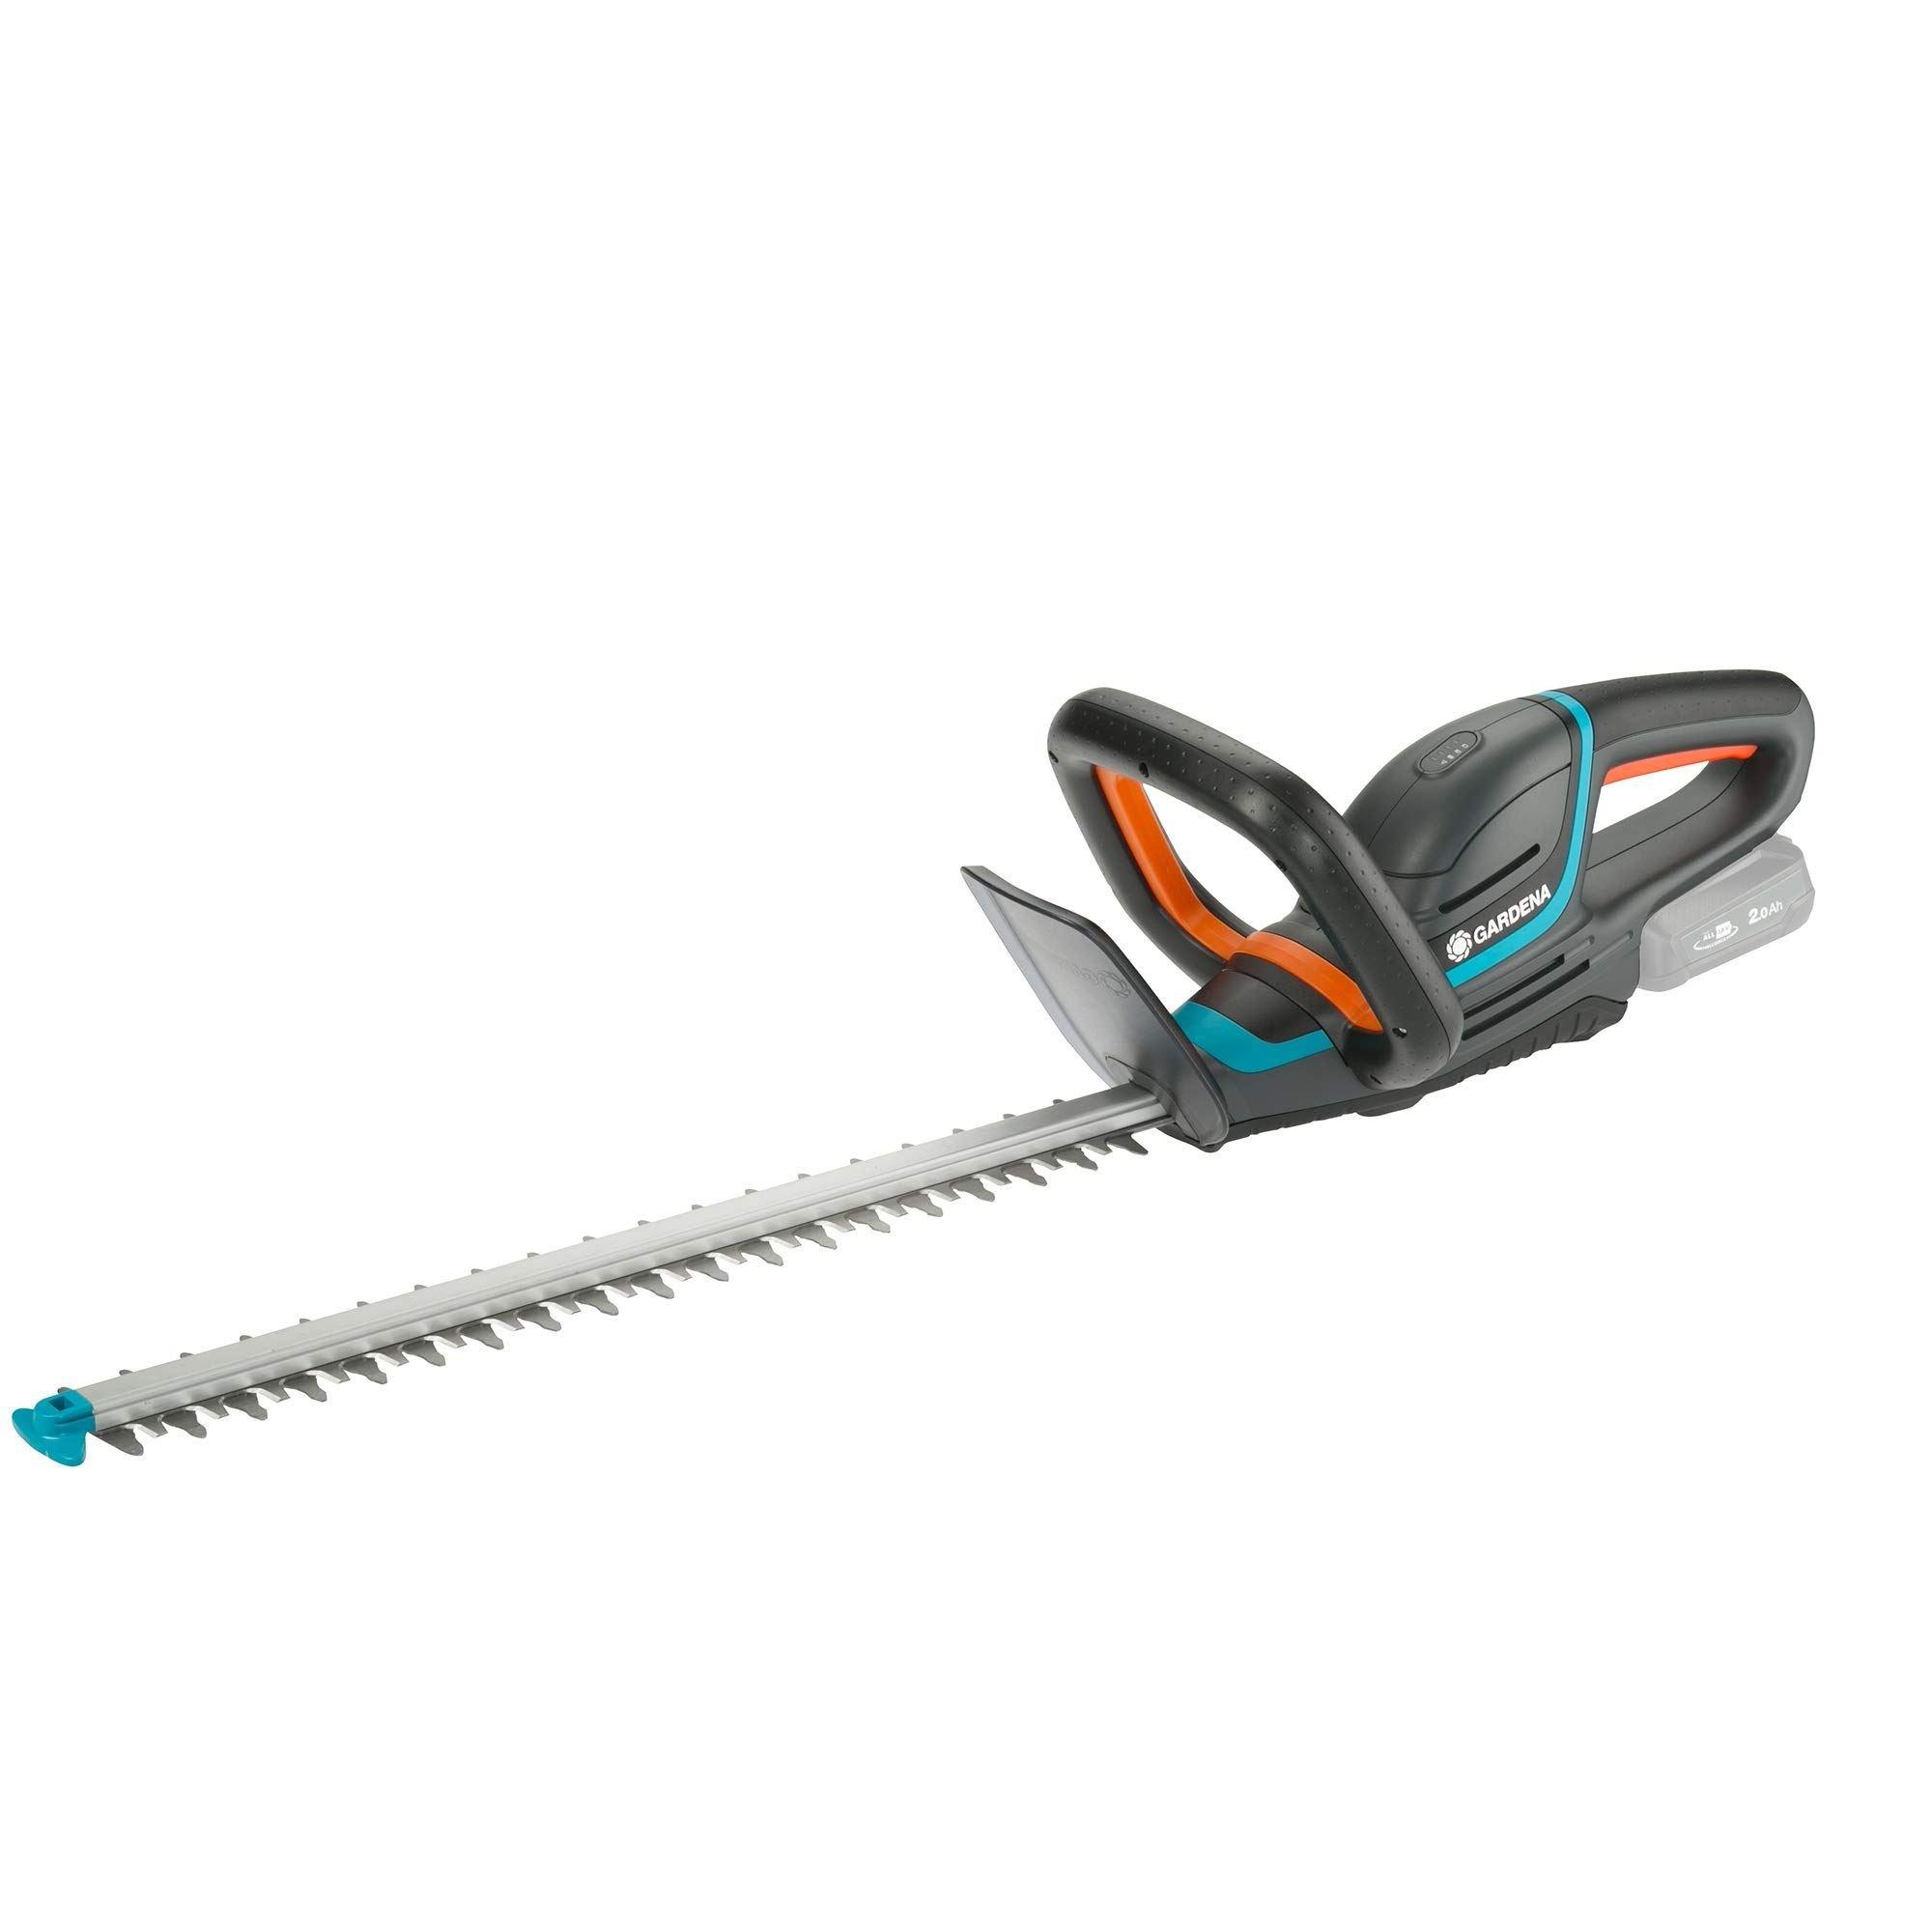 ComfortCut 50/18V Cordless Hedge Trimmer (Without battery)